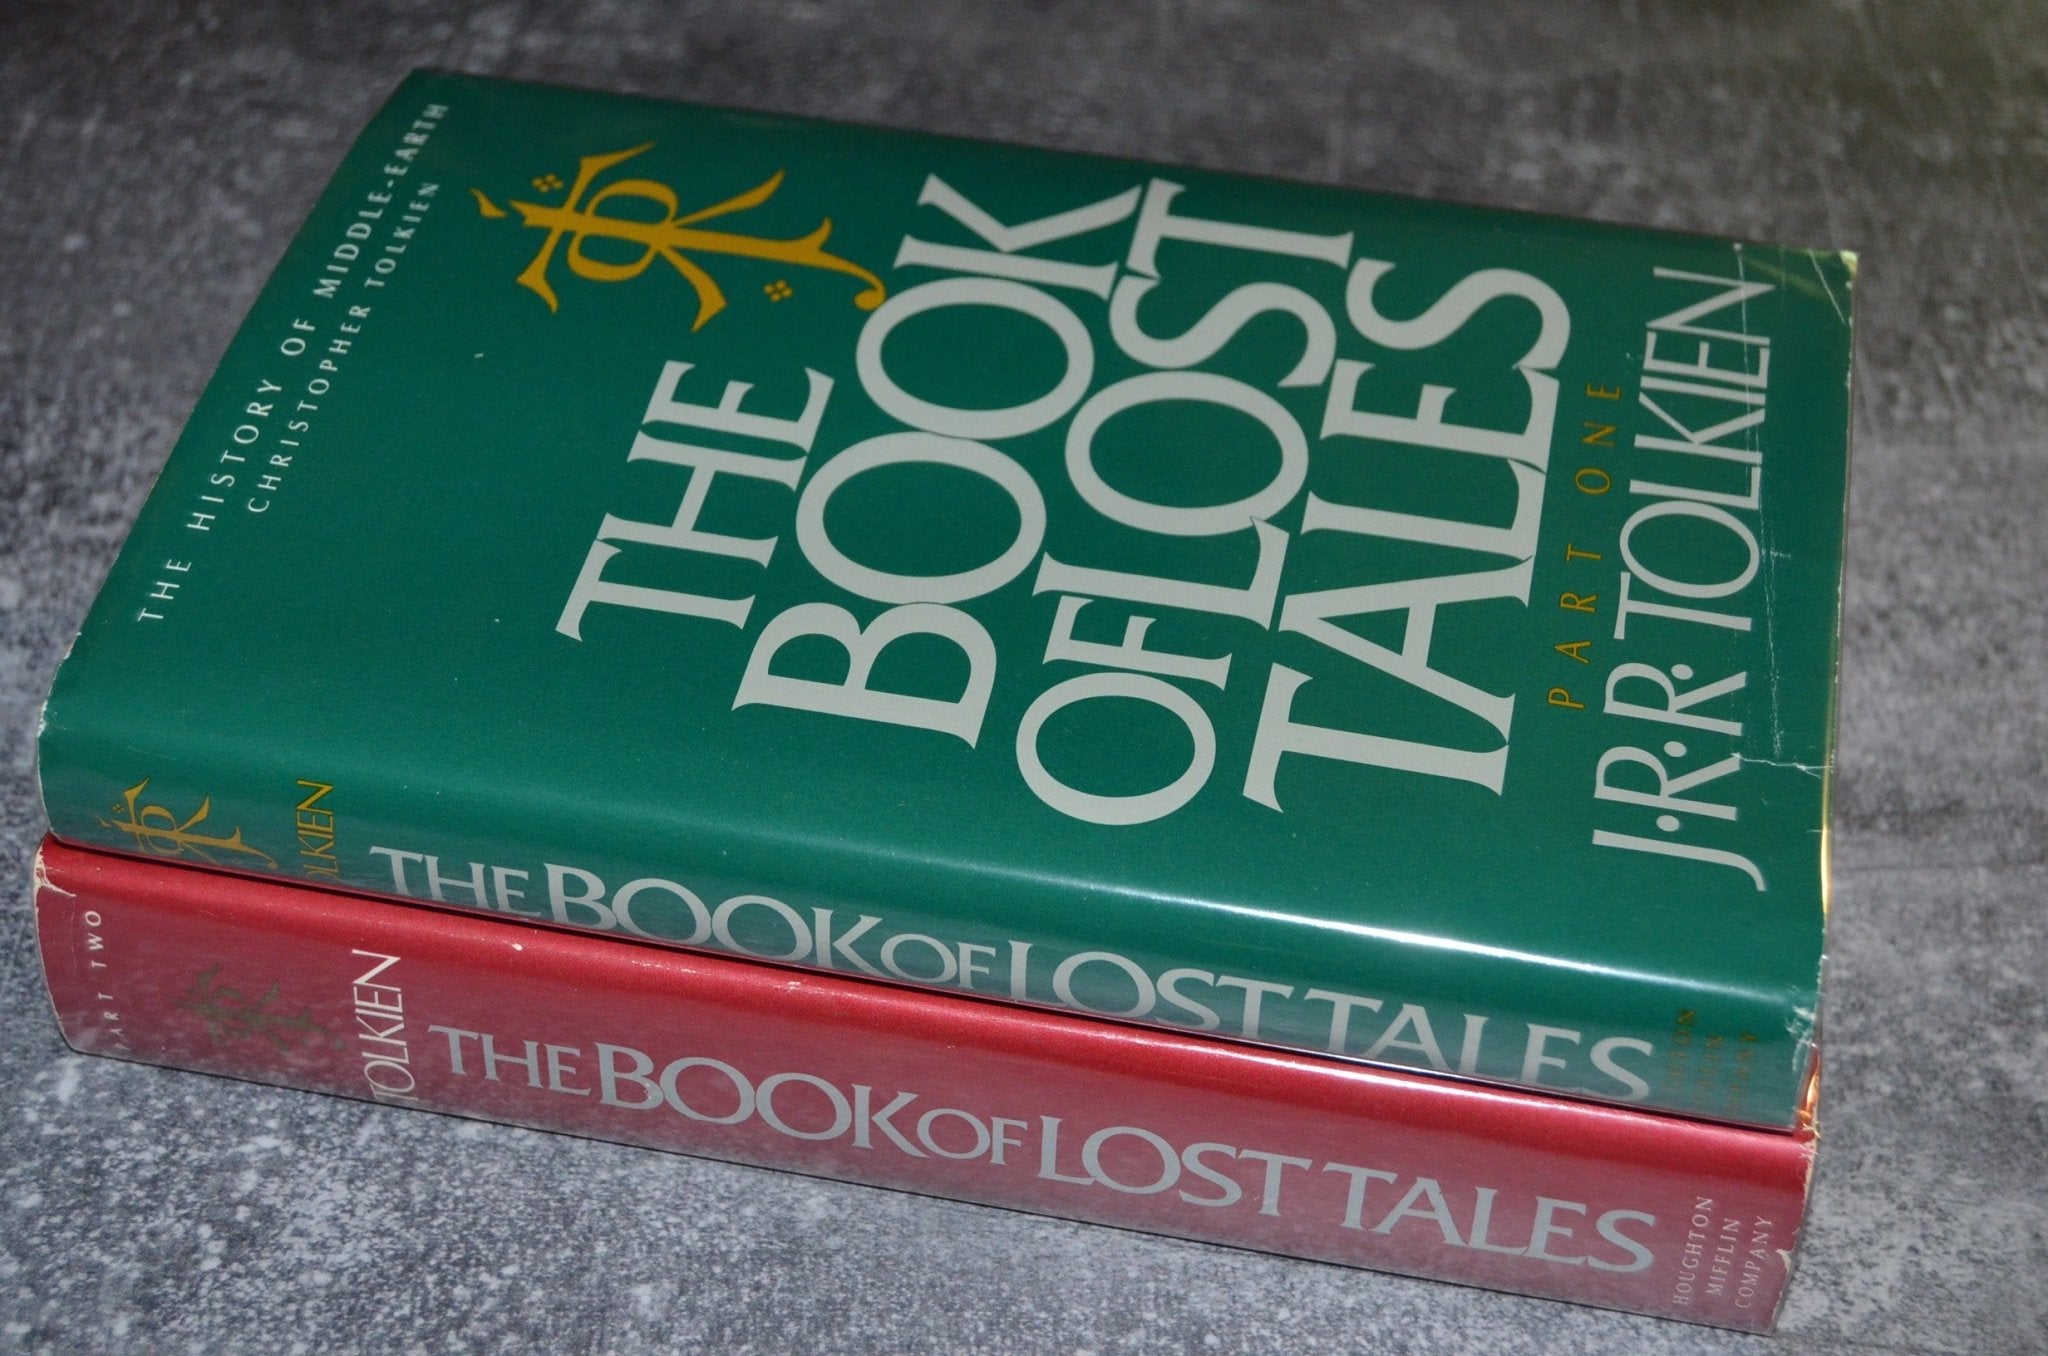 Vintage Book Club Edition The Book of Lost Tales by J. R. R. Tolkien 1984 - Brookfield Books